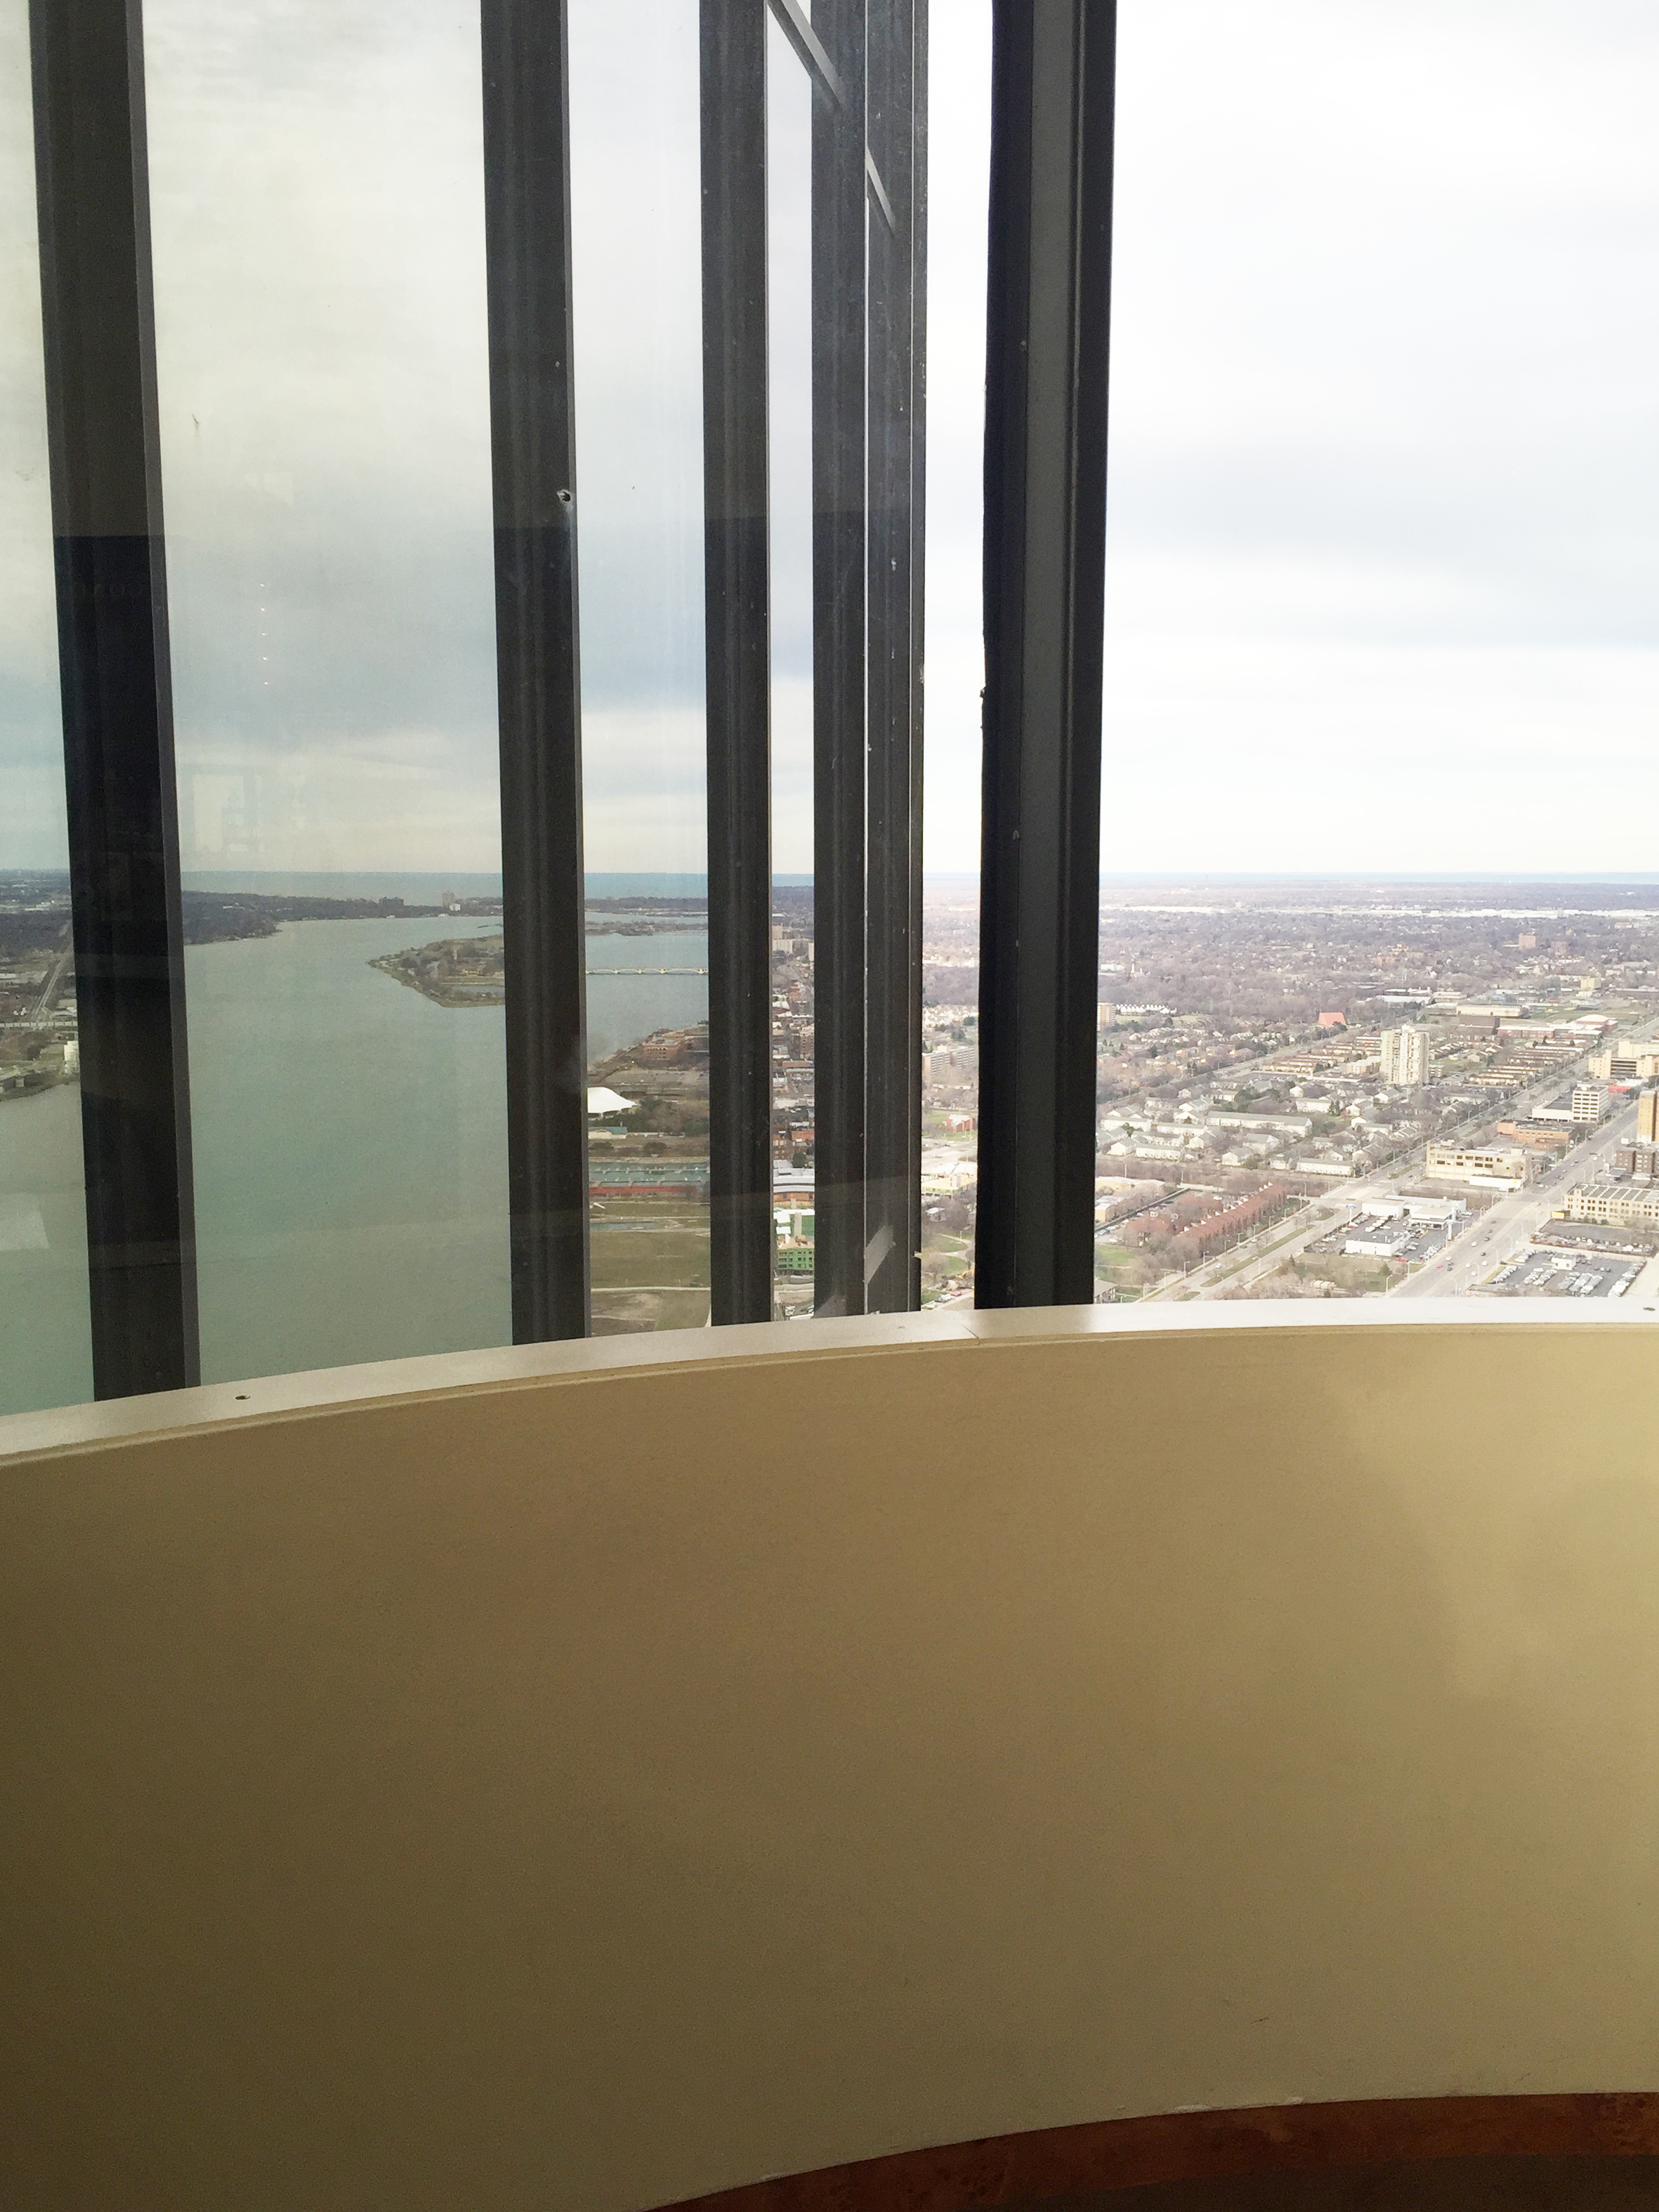  In this photo, taken from the top of the Renaissance Center, the left half is actually a reflection of the river on the windows of the building. 